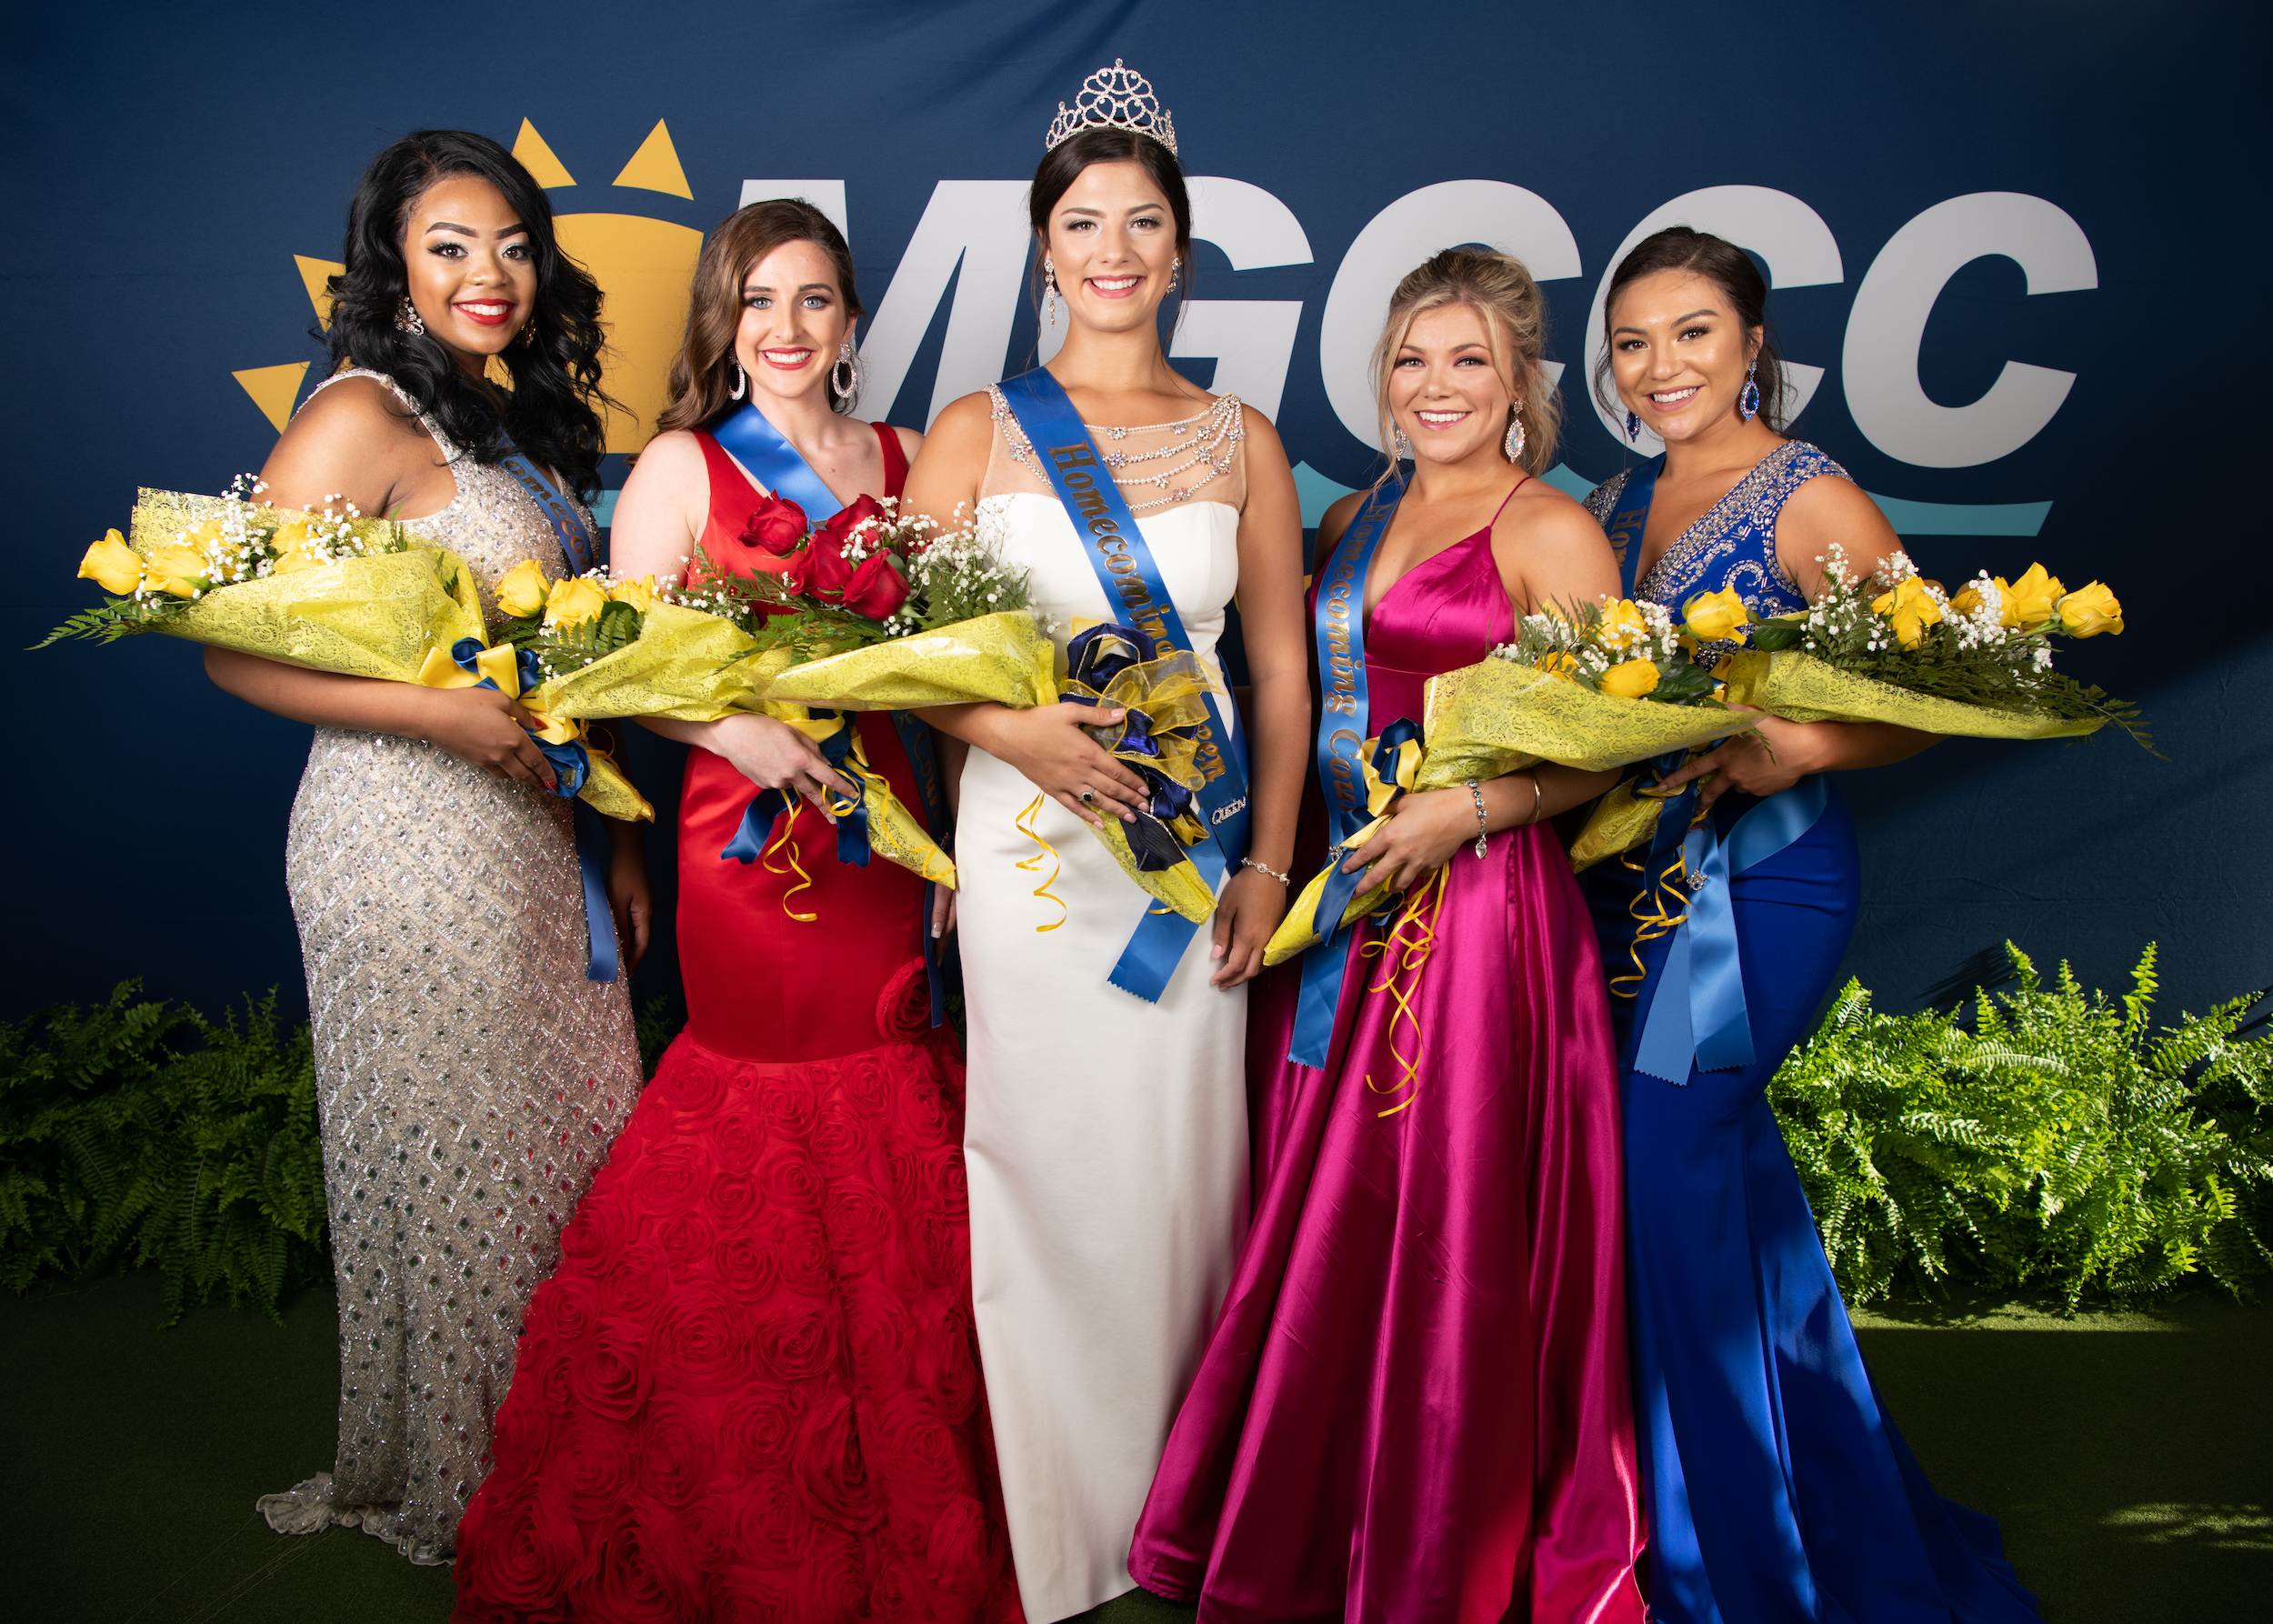 Perkinston Campus Homecoming Court Top, from left: Alanna Lee; Madison Butler, 2018 Perkinston Campus Homecoming Queen; Zoie Lepine; Emily Edwards; and Angel Gavin.